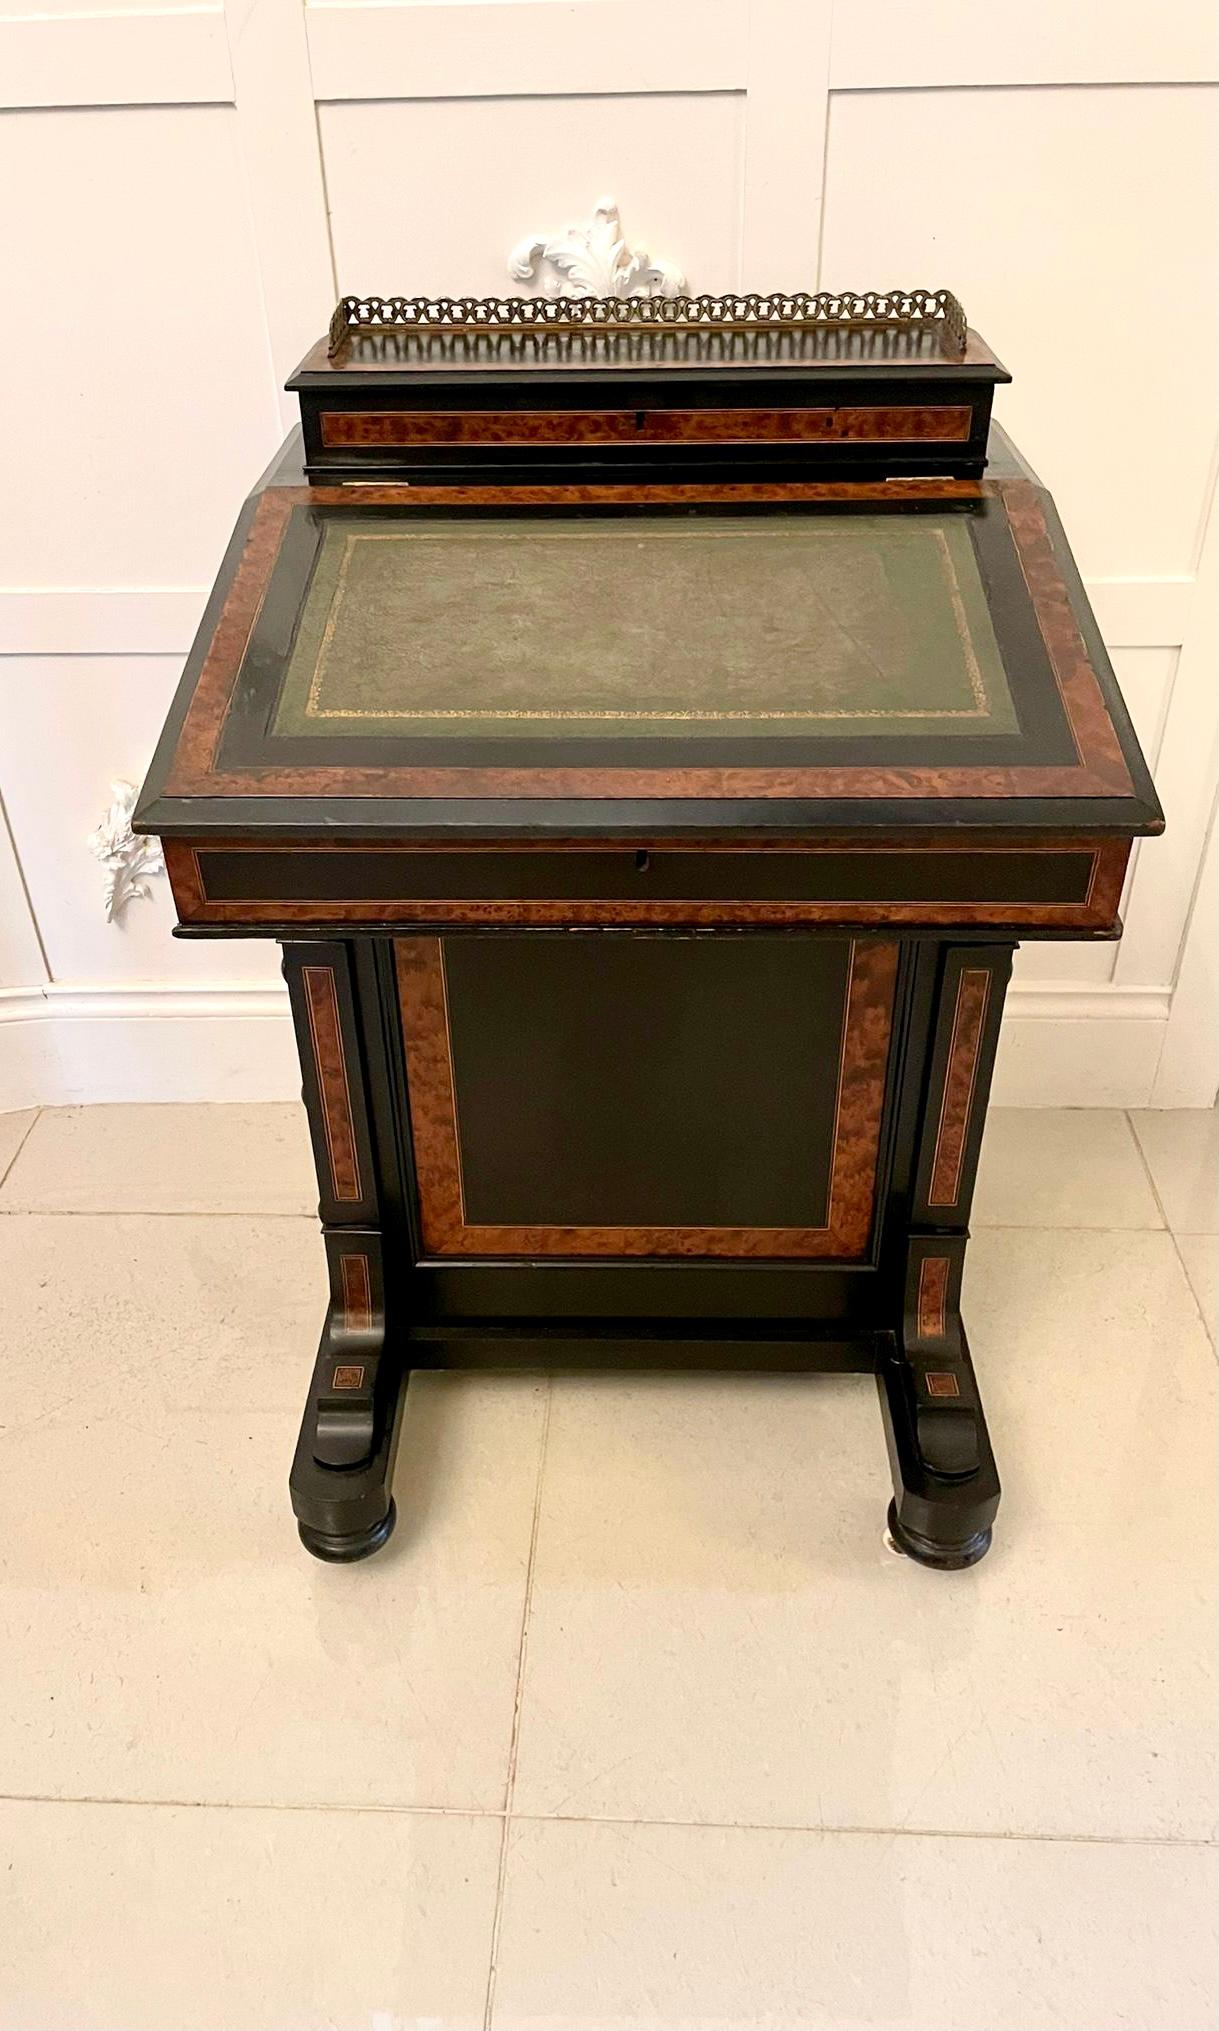 Antique Victorian quality ebonised and walnut crossbanded davenport having a stationery compartment with original brass gallery opening to reveal a fitted interior, foure side drawers and four dummy drawers all crossbanded in walnut and original